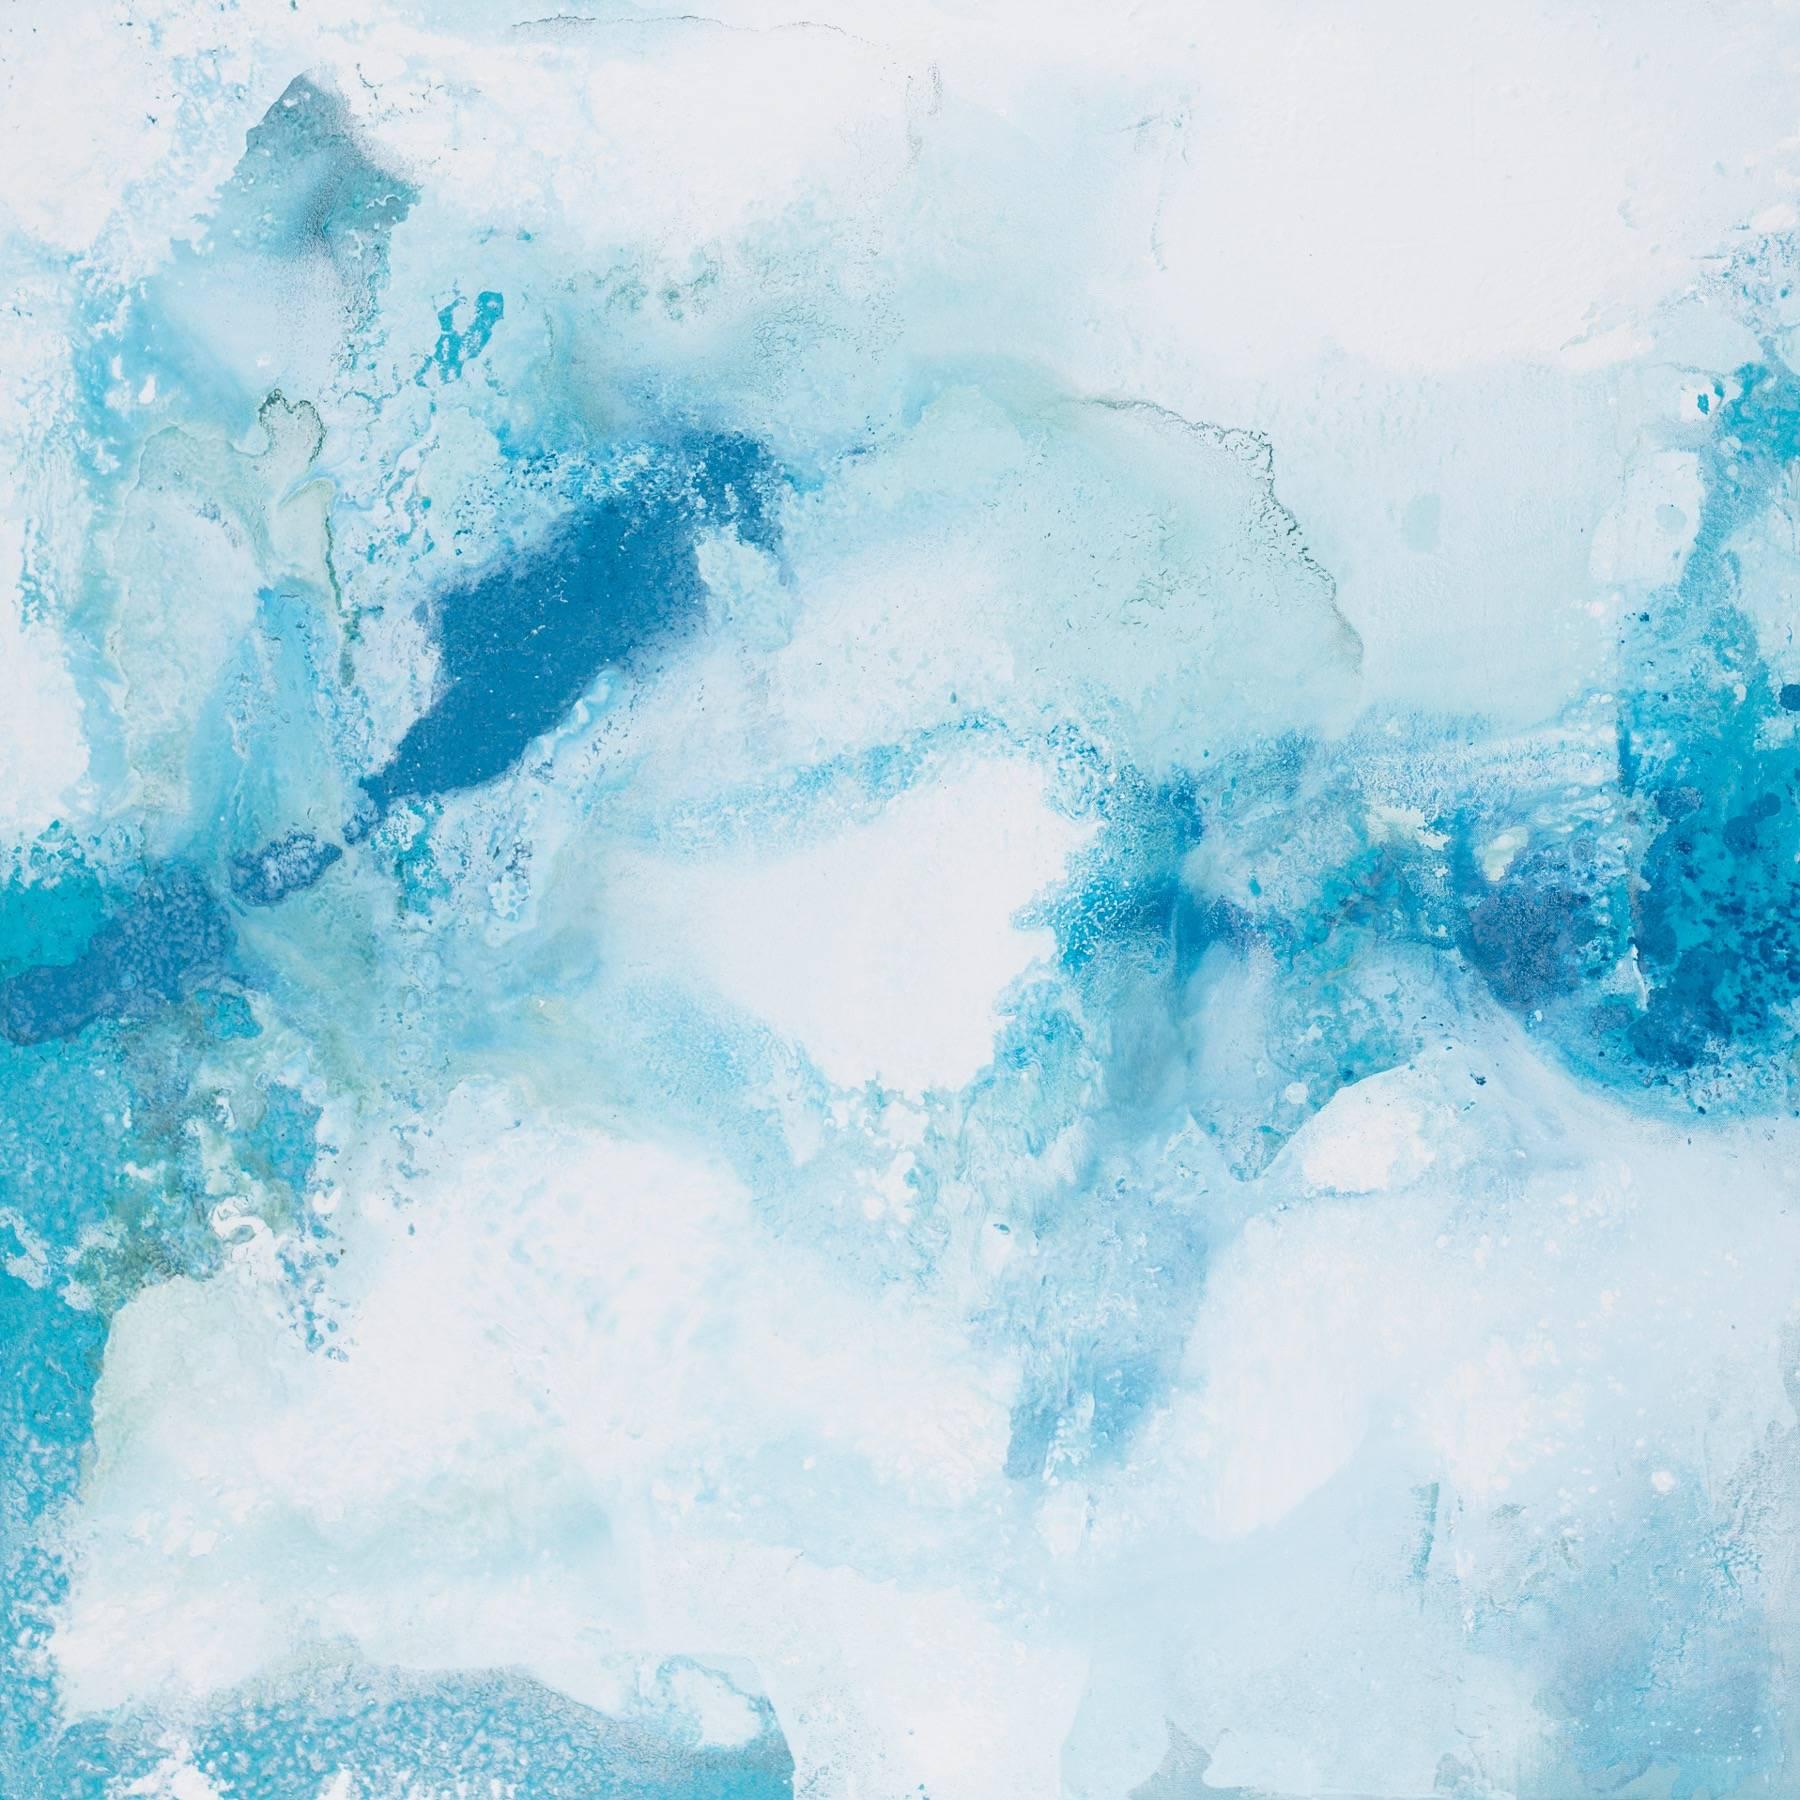 John Schuyler Abstract Painting - "Eterno #46" Abstract Resembling Marble, in Blues and White